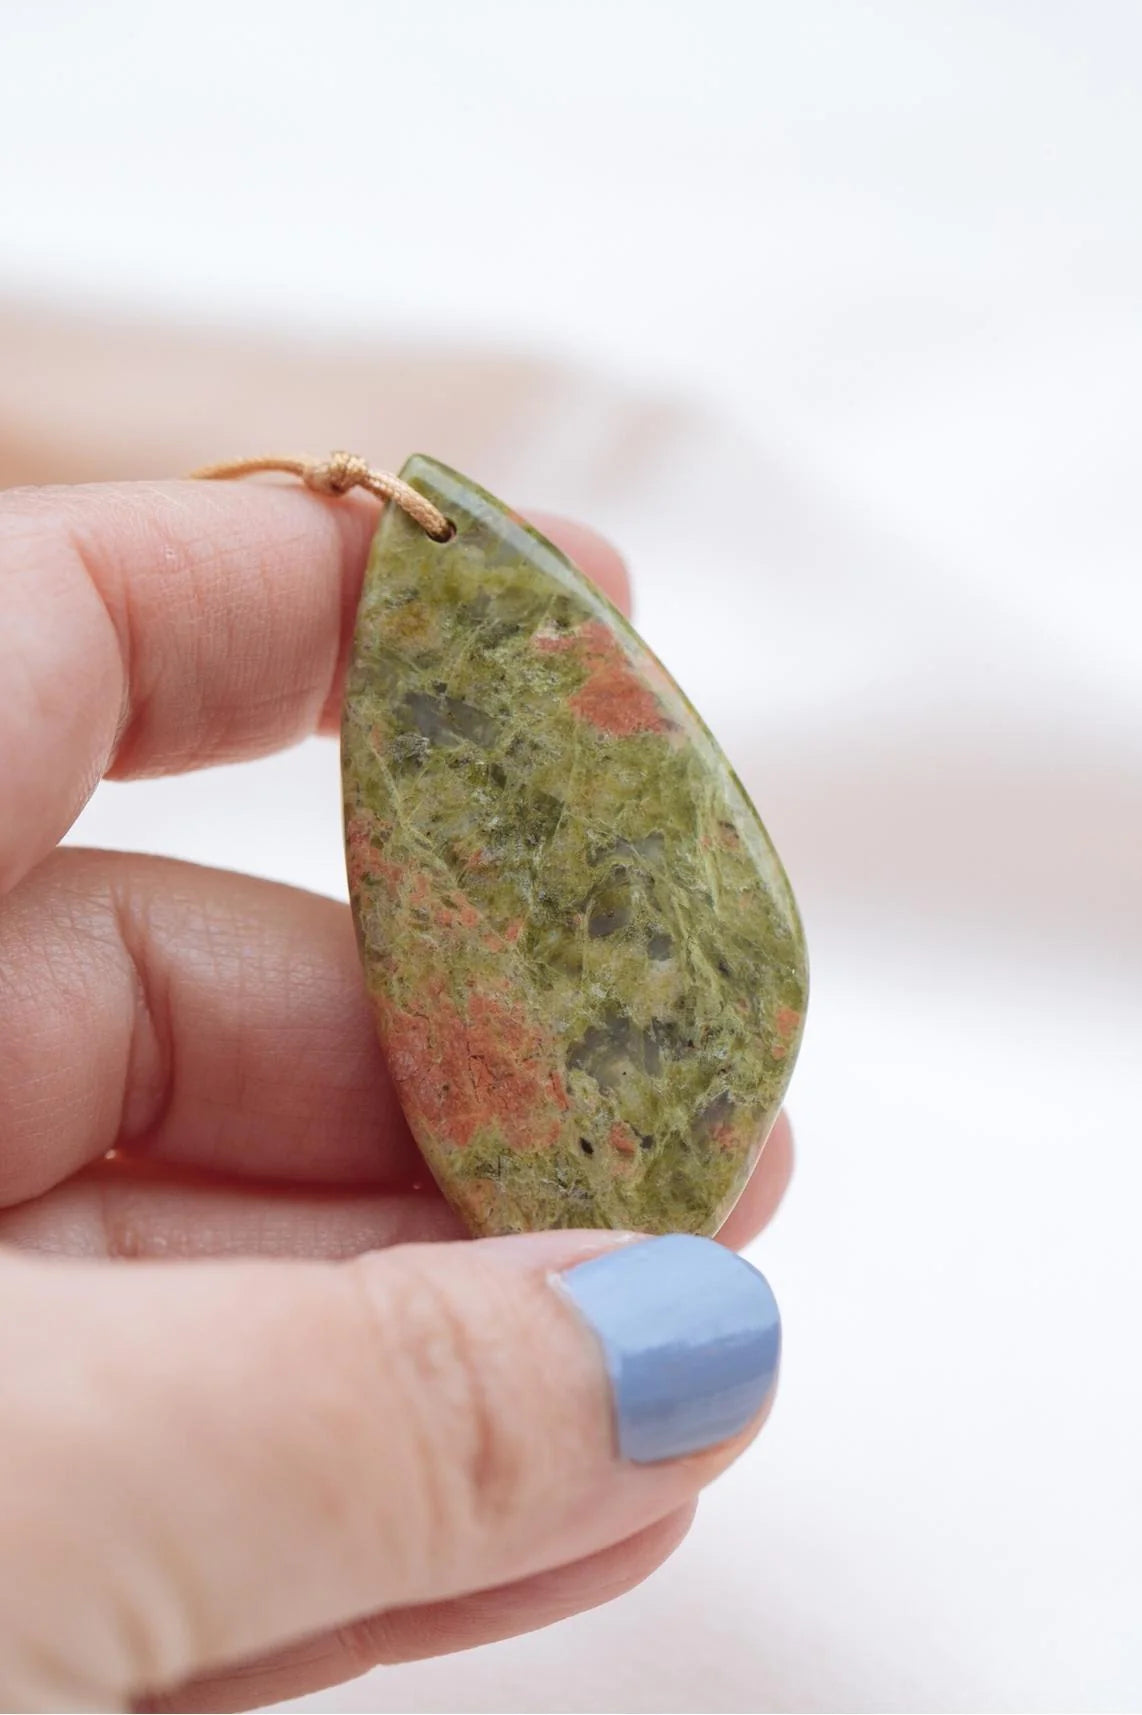 Balance Touch Stone - Unakite StoneOur beautiful, smooth, soothing Touchstones were intentionally designed as a tangible reminder of your truths. These sweet stones warm with your body's heat, exude healing energies, and can literally be grasped onto like